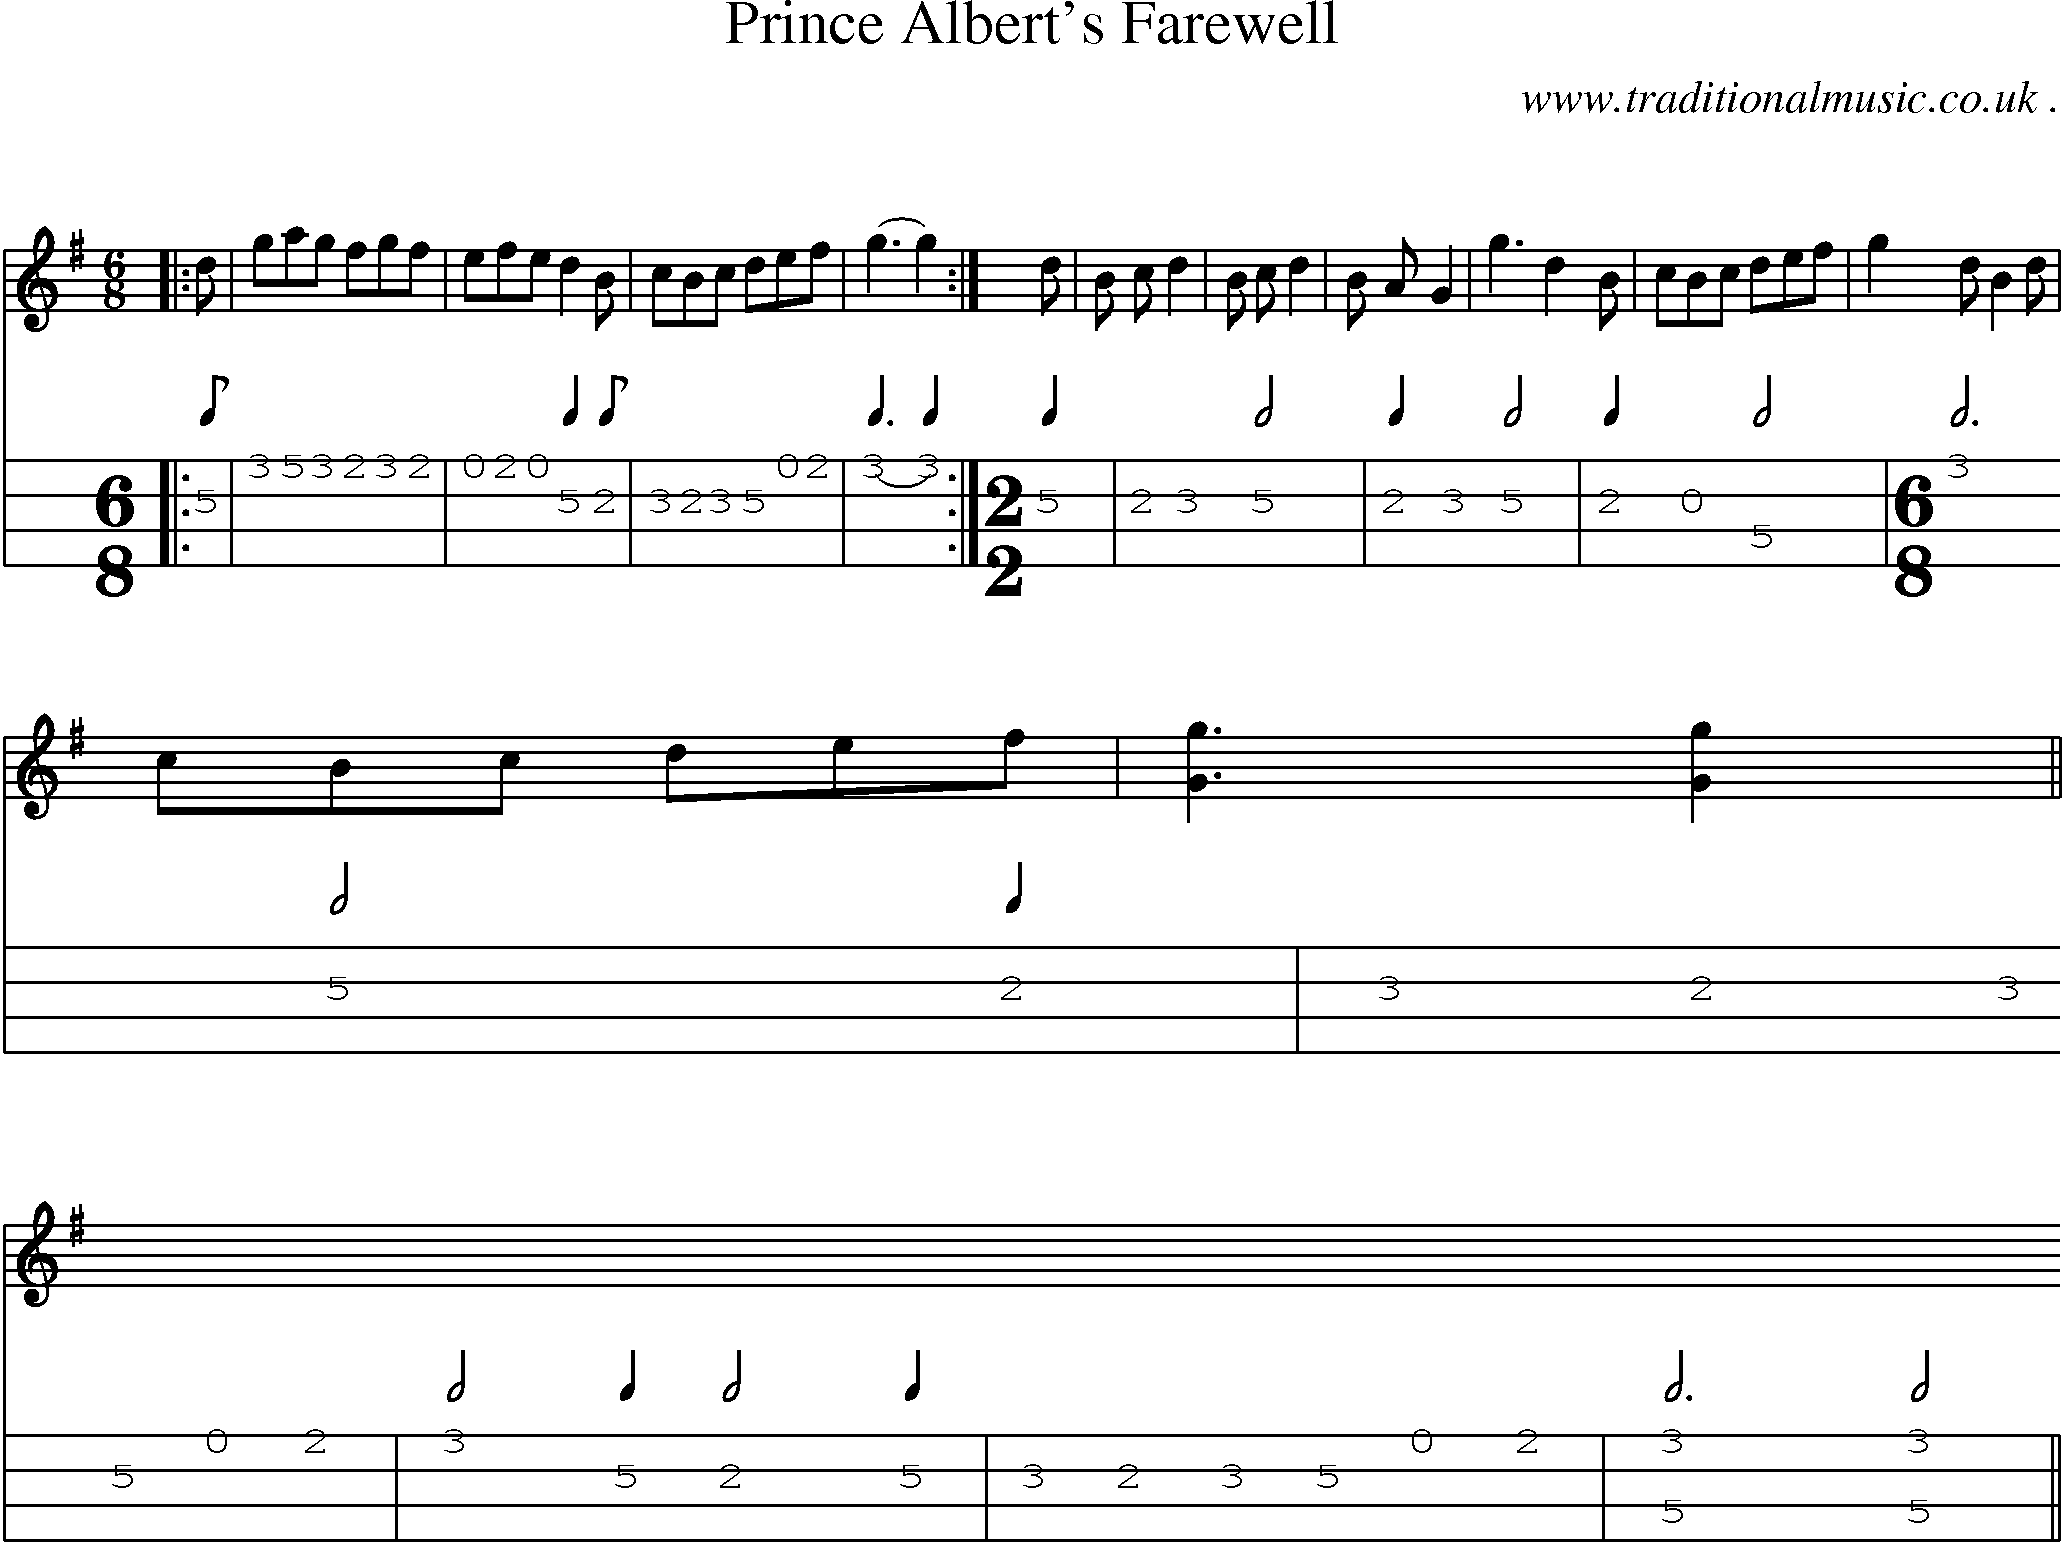 Sheet-music  score, Chords and Mandolin Tabs for Prince Alberts Farewell